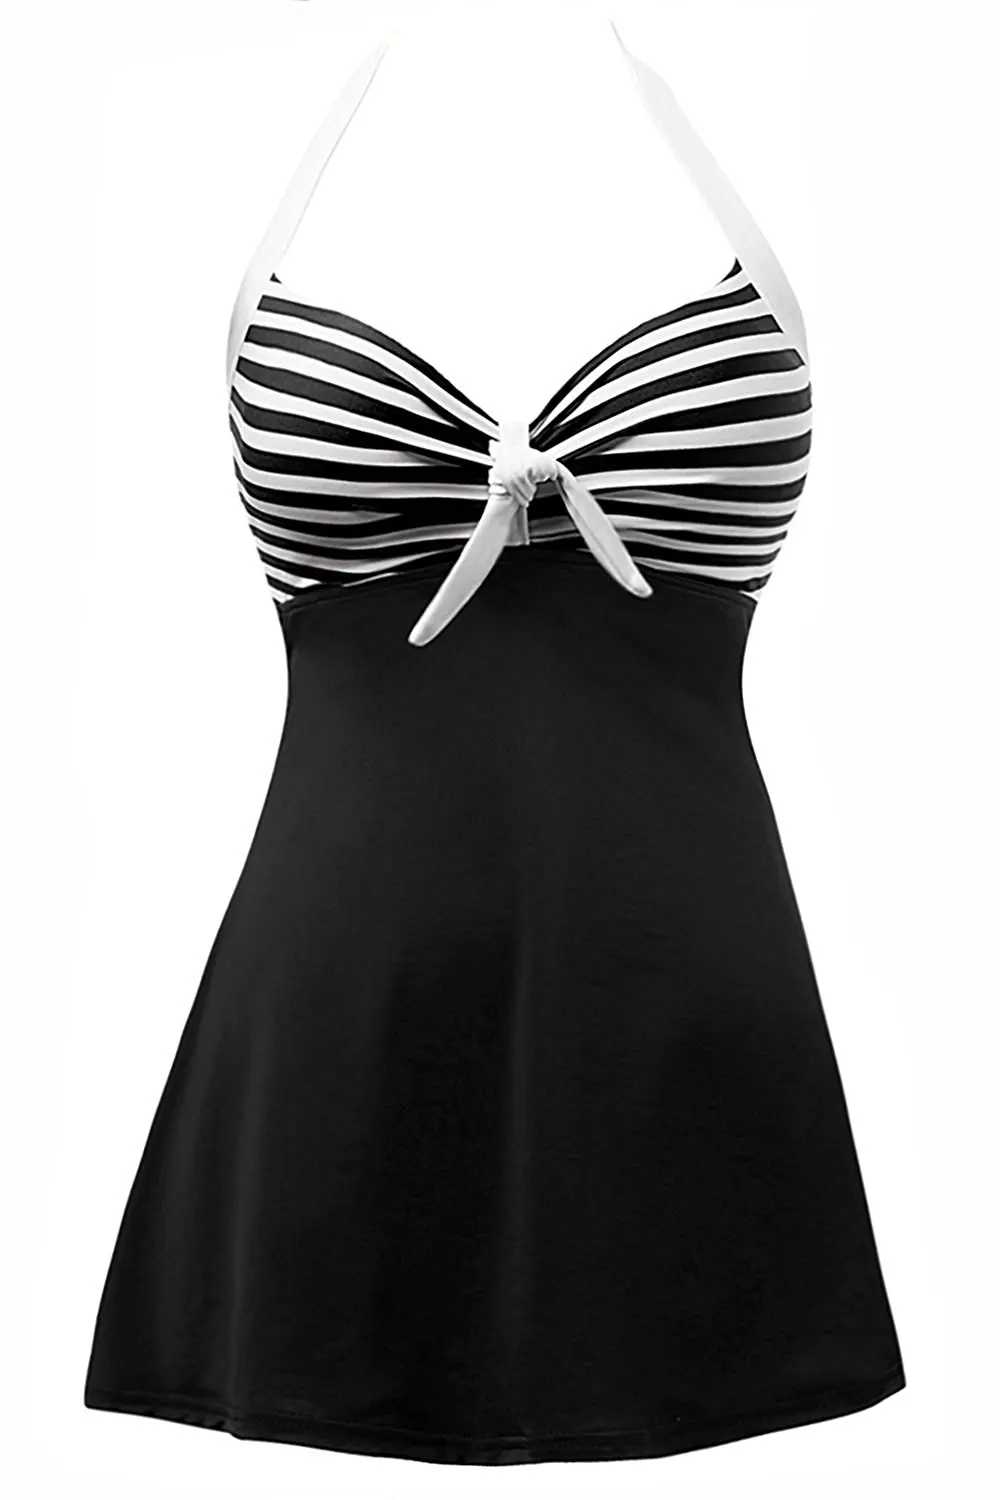 YaYa Bay Swimsuit Womens Vintage Sailor Straps Halter Pin Up Swimsuit One P...